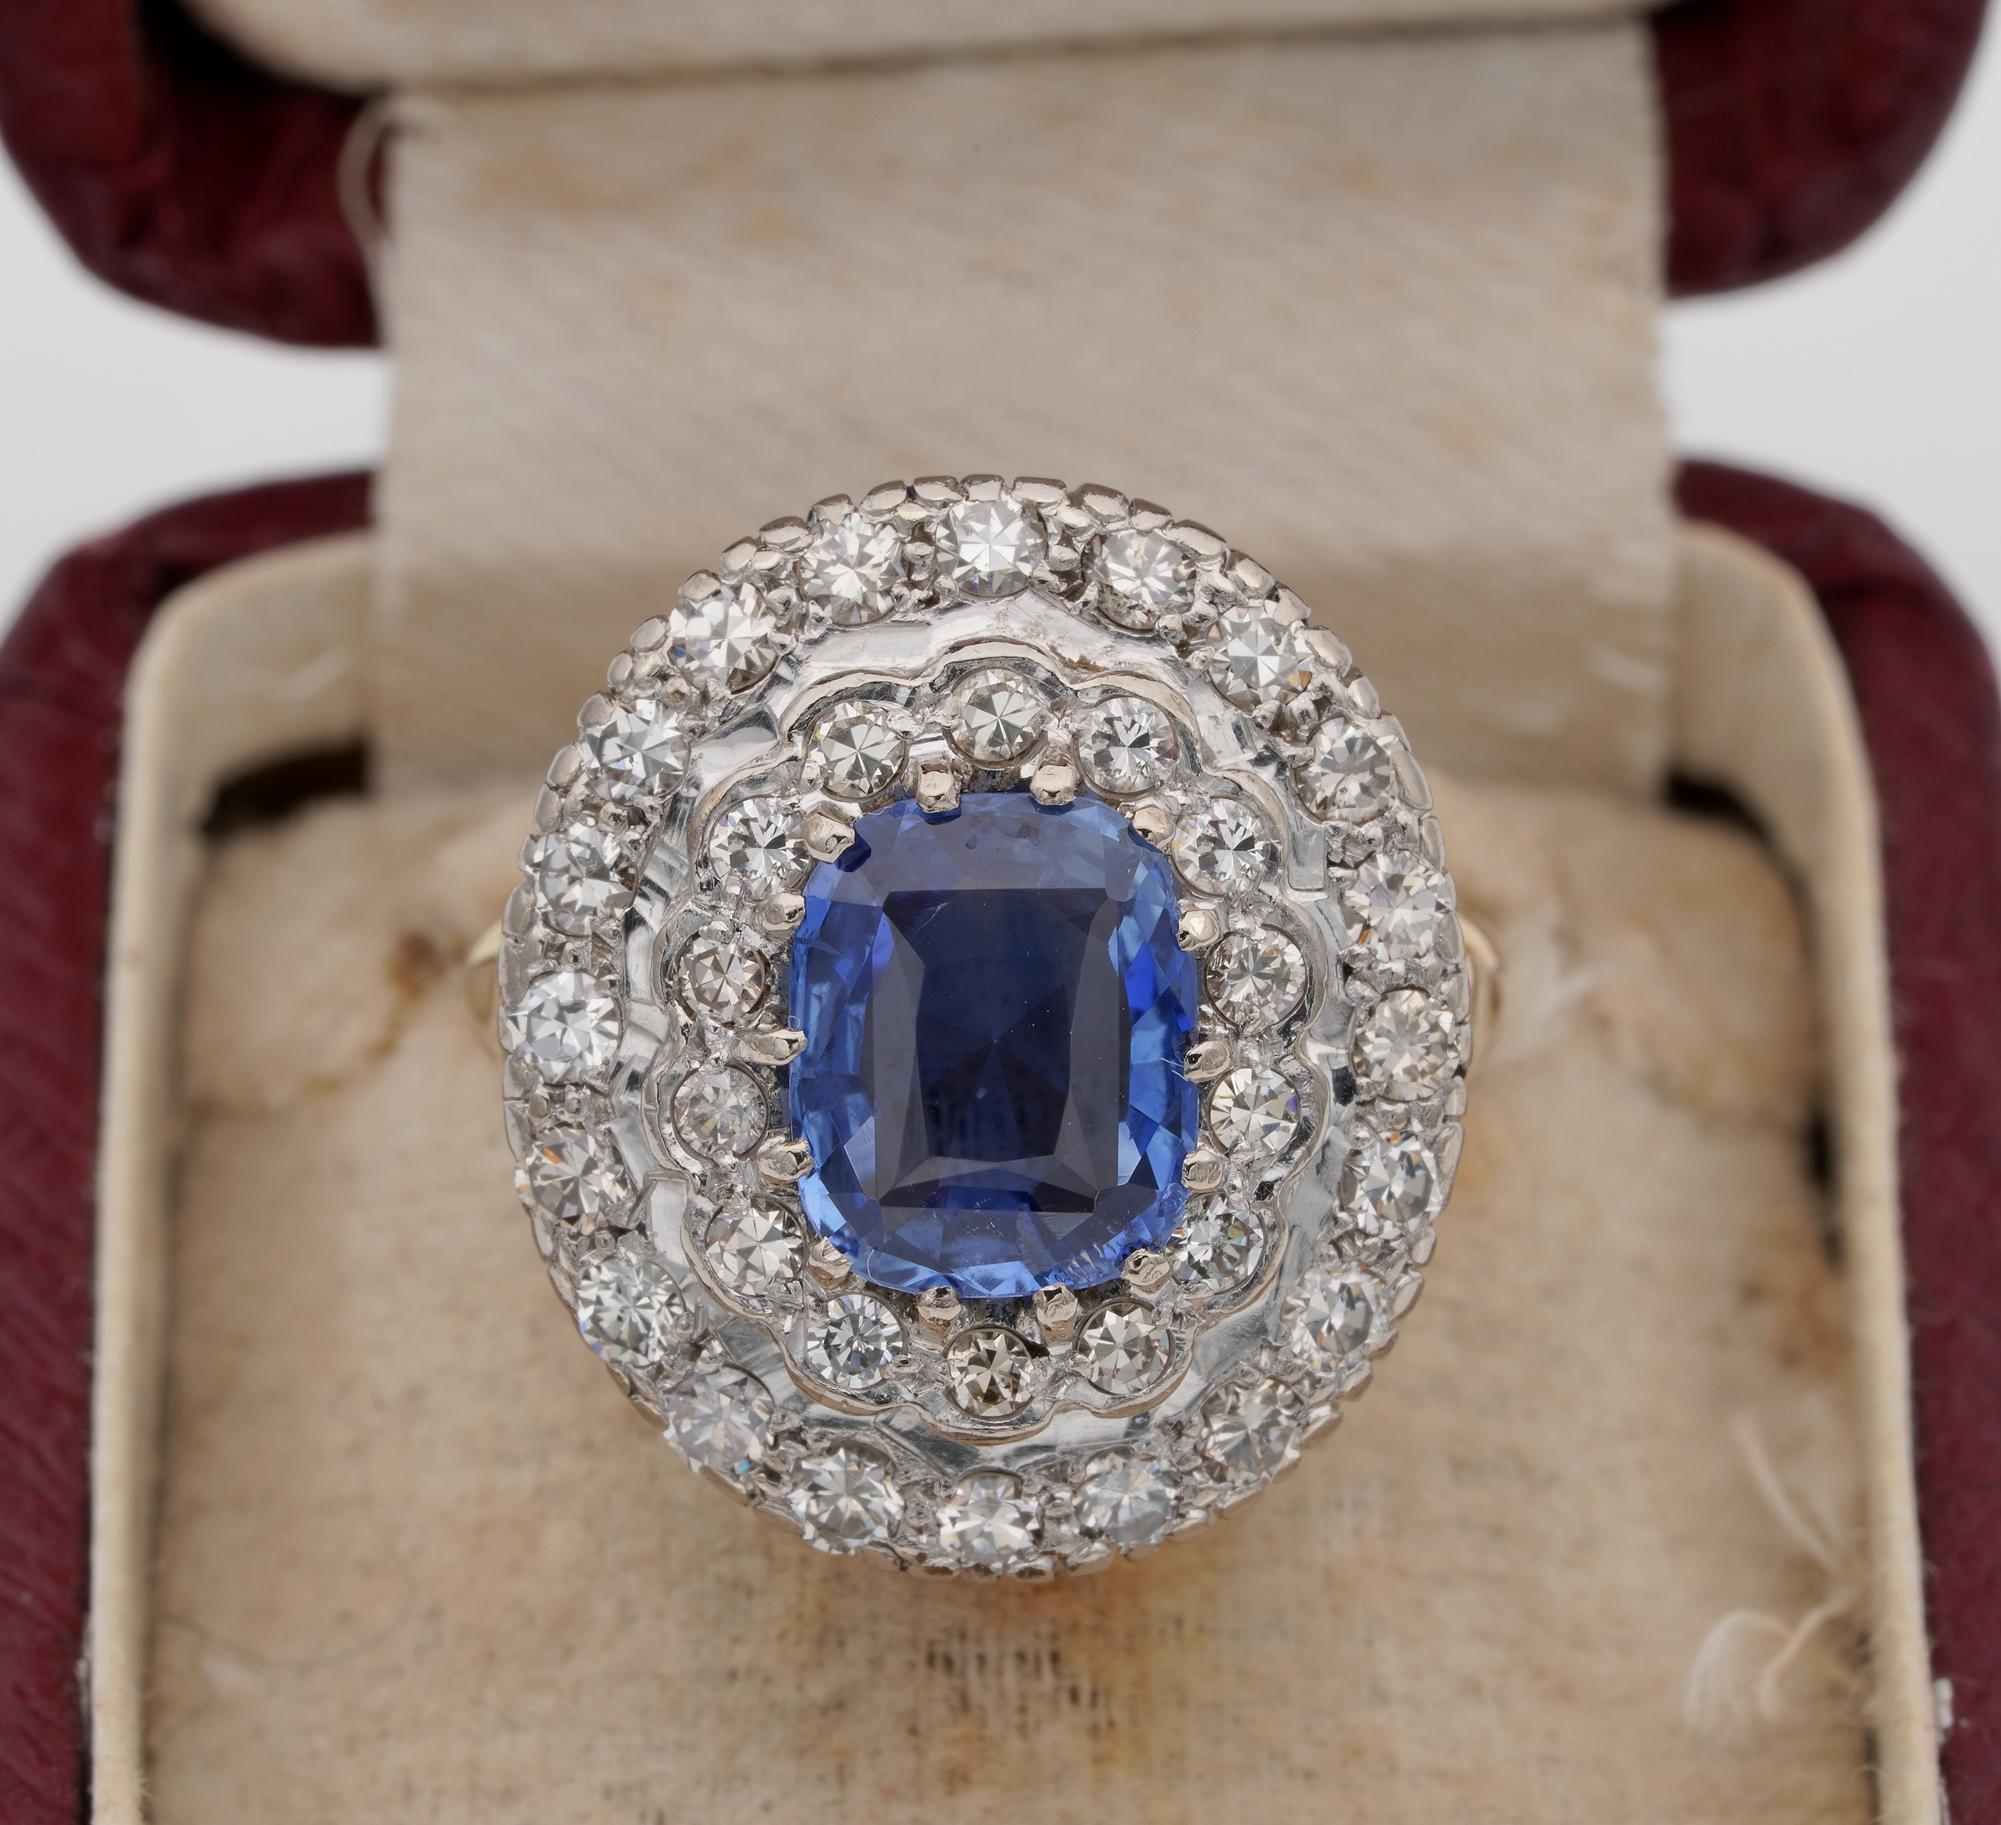 Past Statement
Imposing classy style from the late Art Deco period designed in a large oval crown with two tiers of Diamonds surrounding a fantastic natural Sapphire, a statement ring from past times
Entirely hand crafted of solid Platinum for the